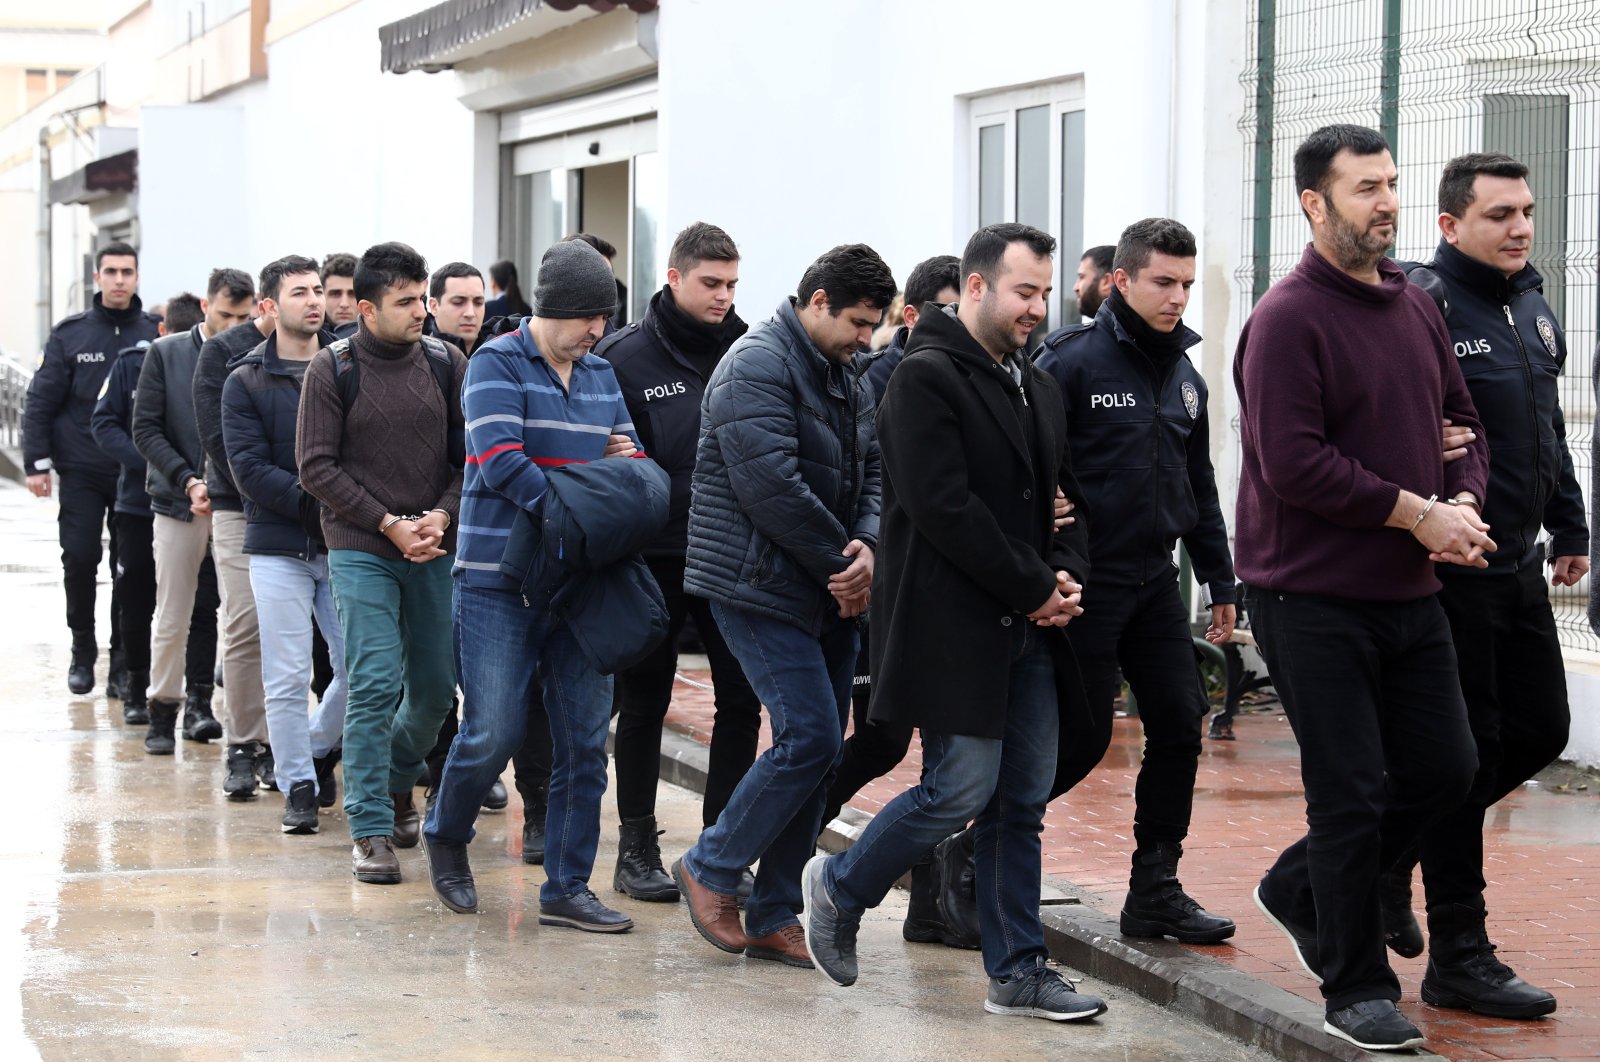 Police escort FETÖ suspects to the courthouse in Adana, Turkey, in this undated photo. (PHOTO BY ZİYA RAMOĞLU) 